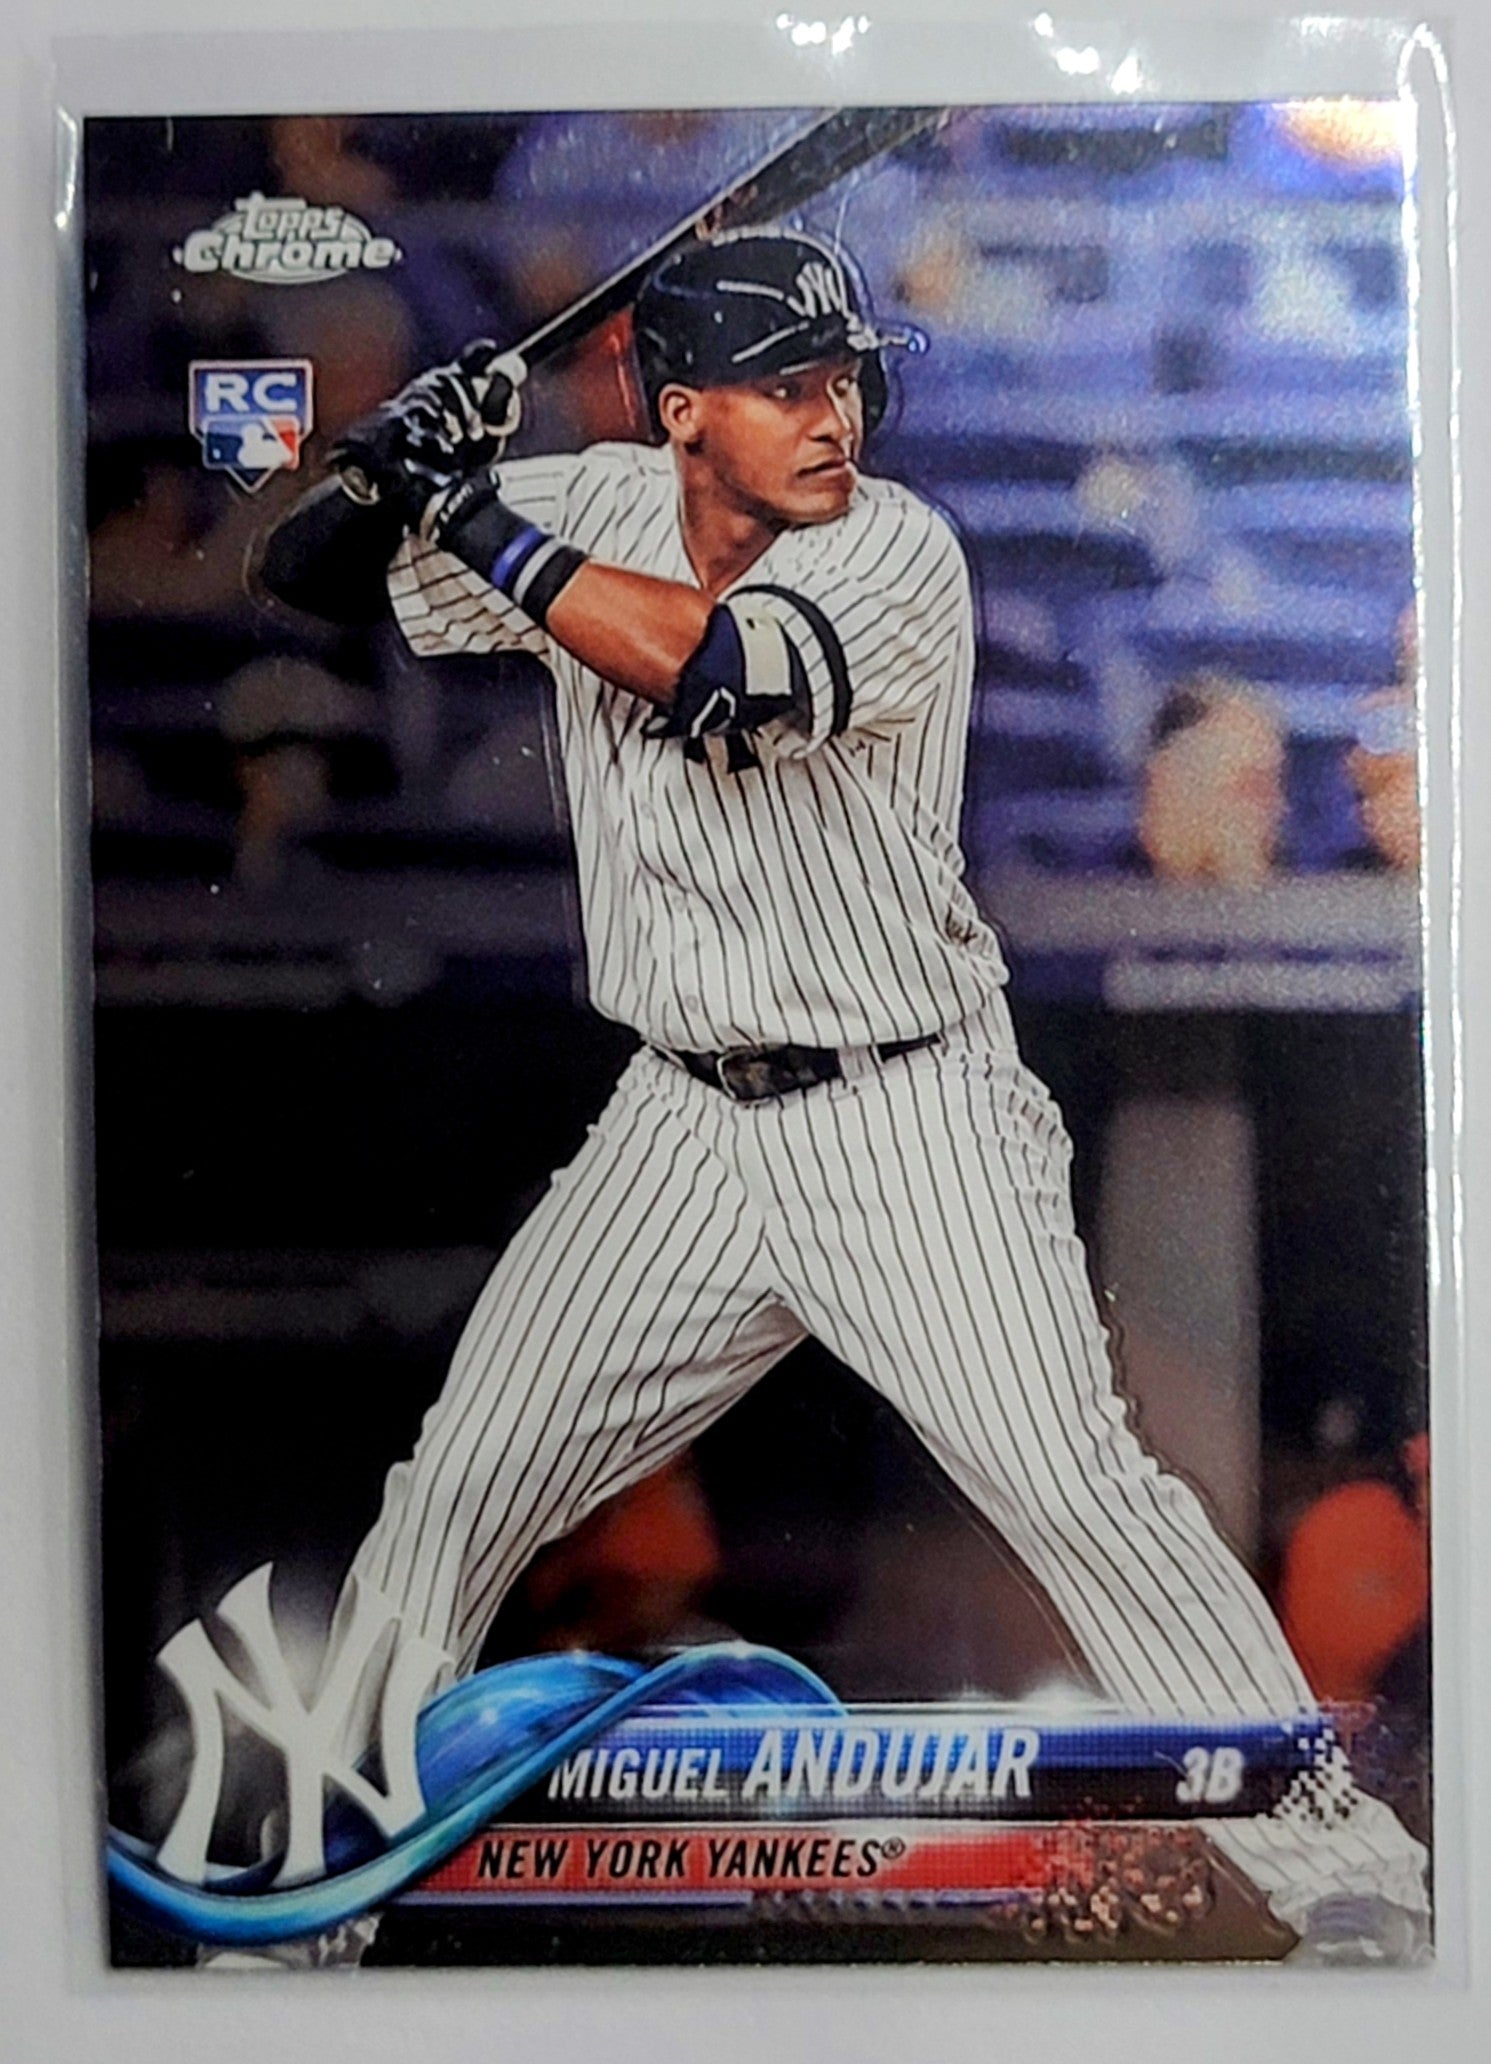 2018 Topps Chrome Miguel
  Andujar Rookie New York
  Yankees Baseball Card  TH1CB simple Xclusive Collectibles   